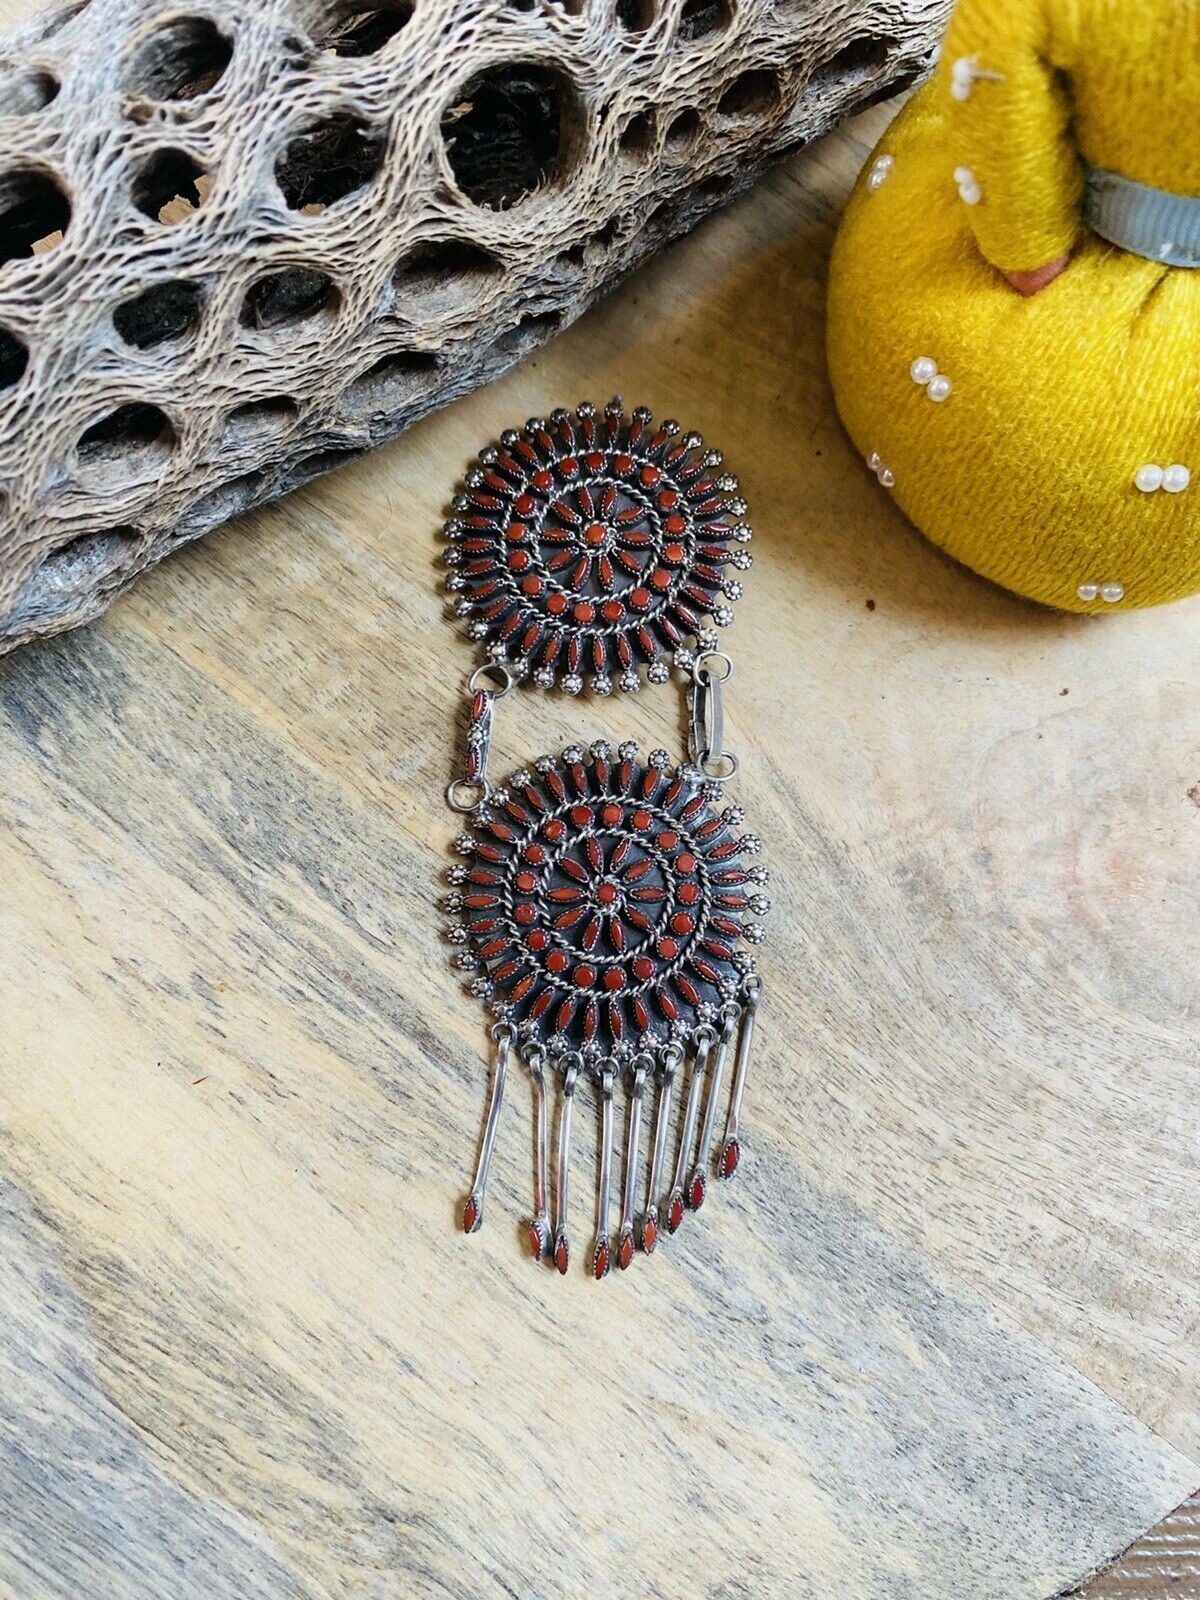 Vintage Zuni Sterling Silver & Coral Pin/ Pendant Signed